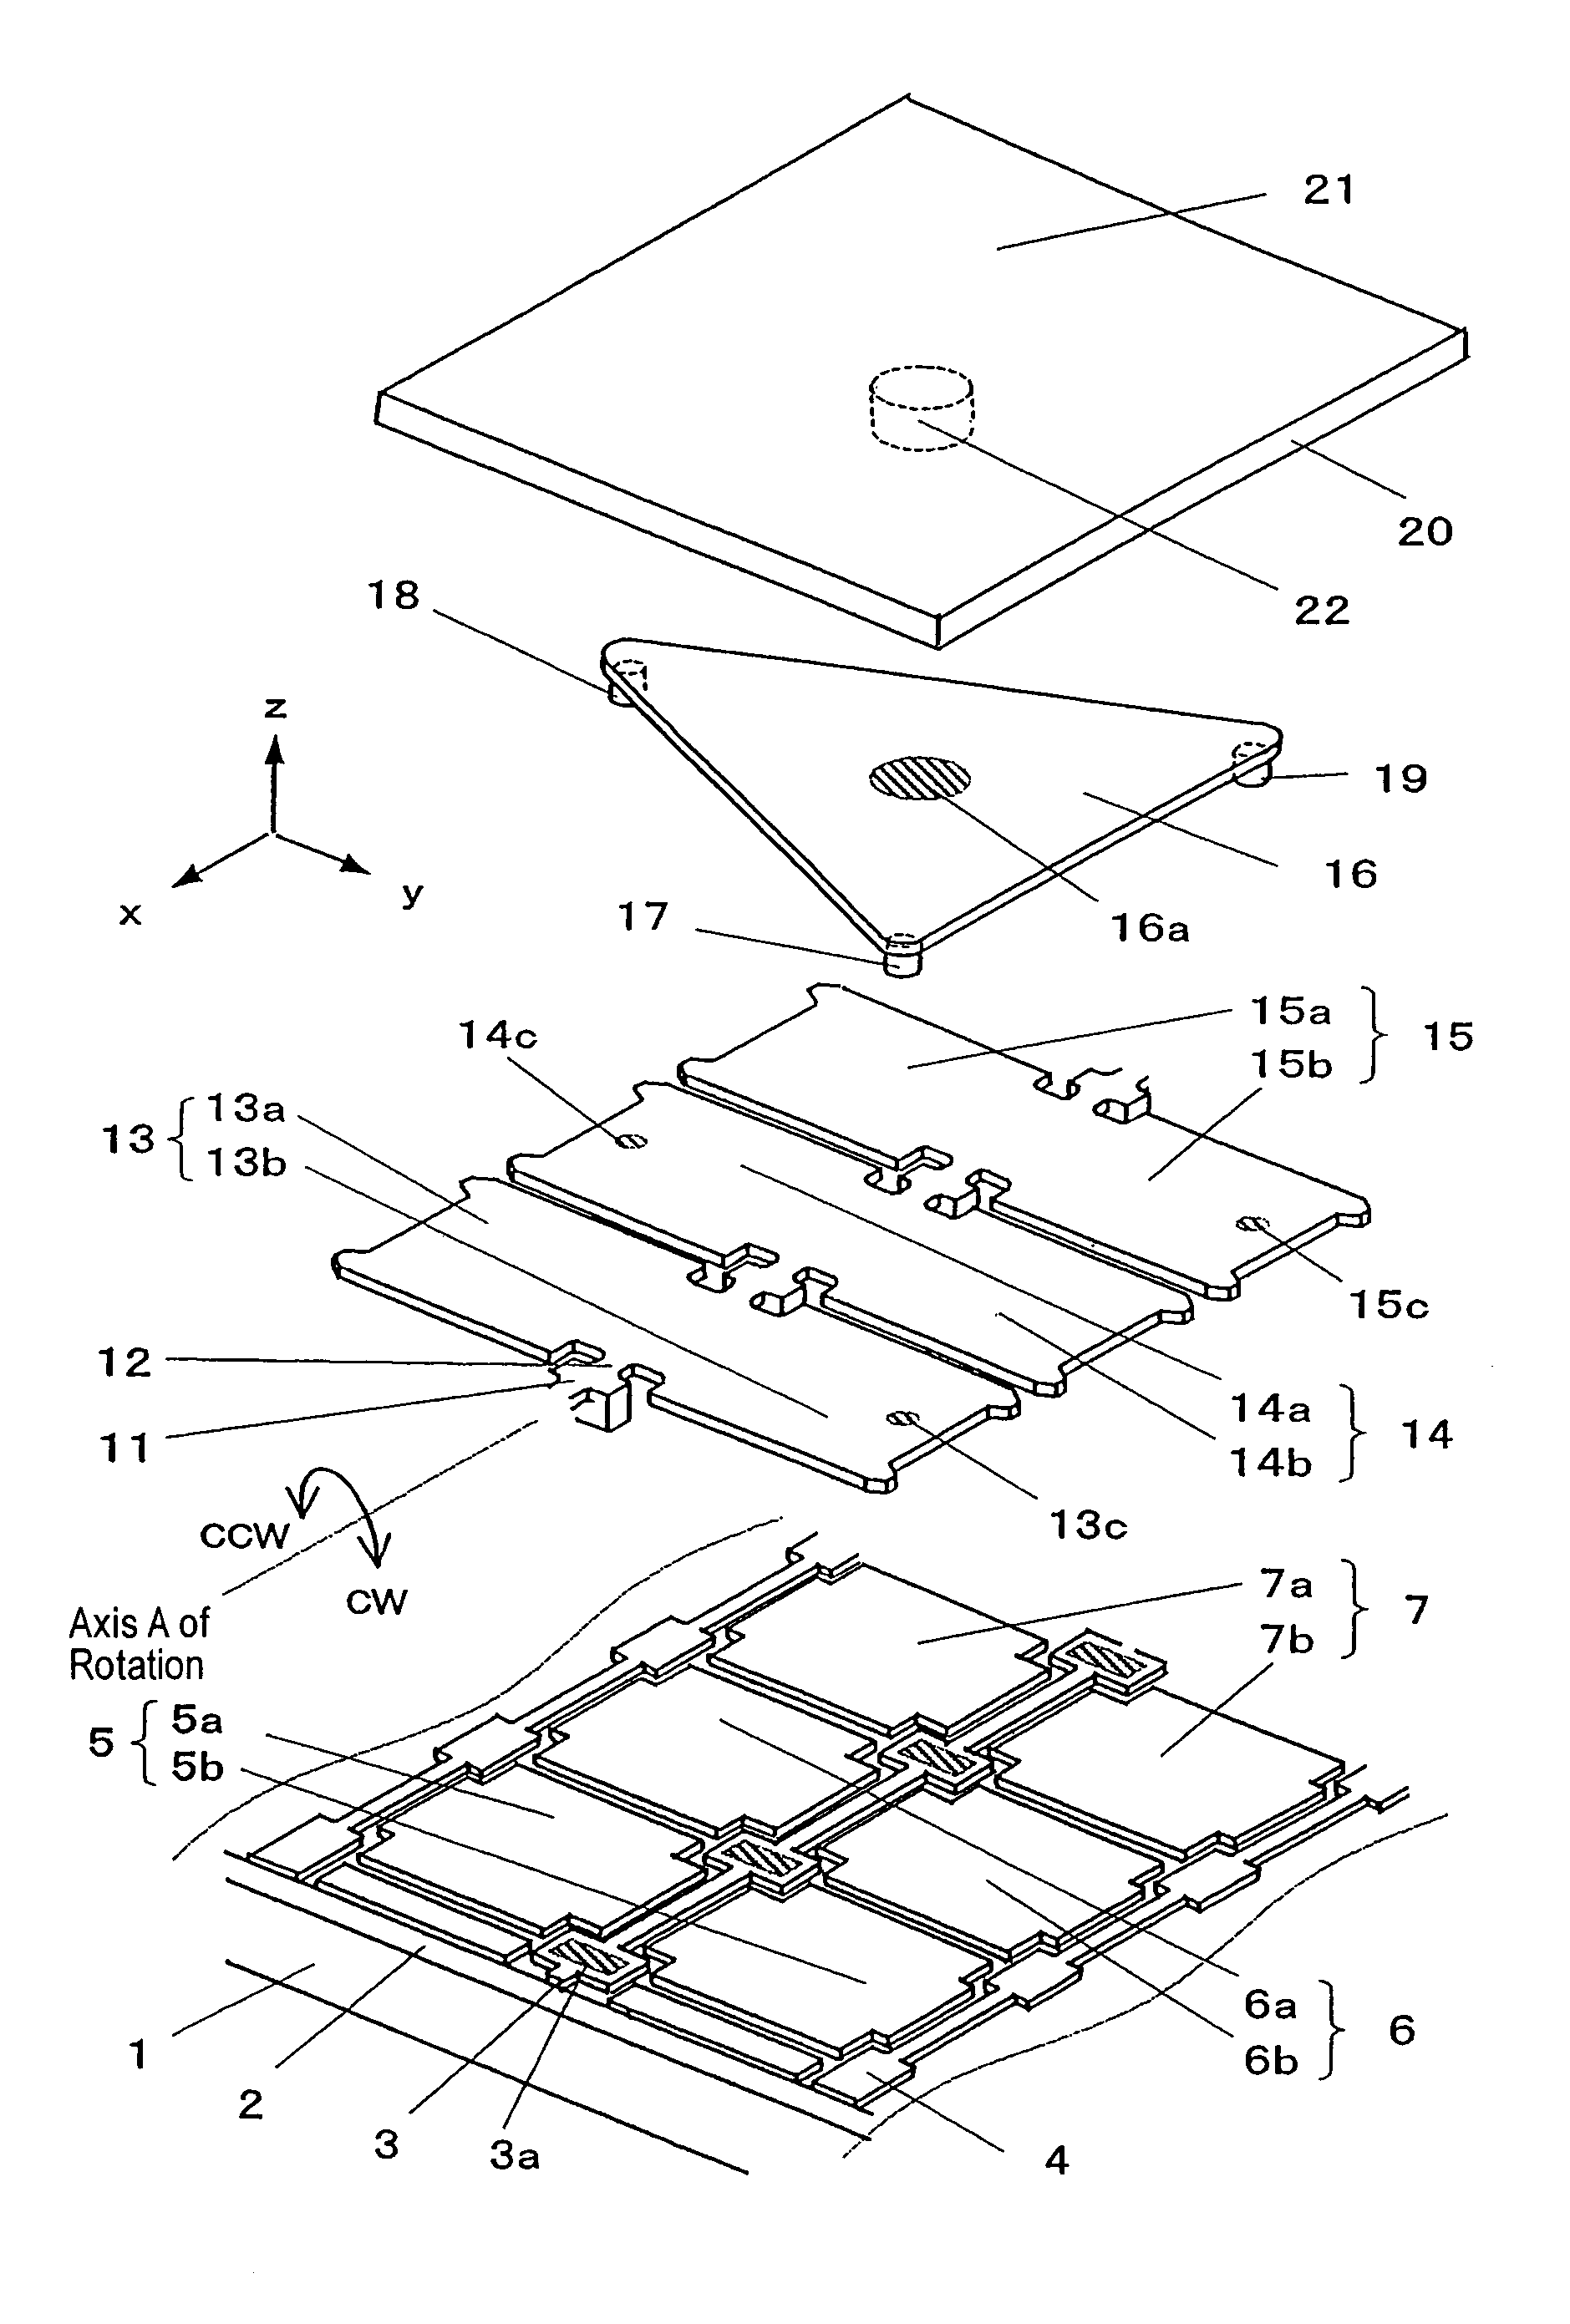 Deformable mirror and optical controller including the deformable mirror